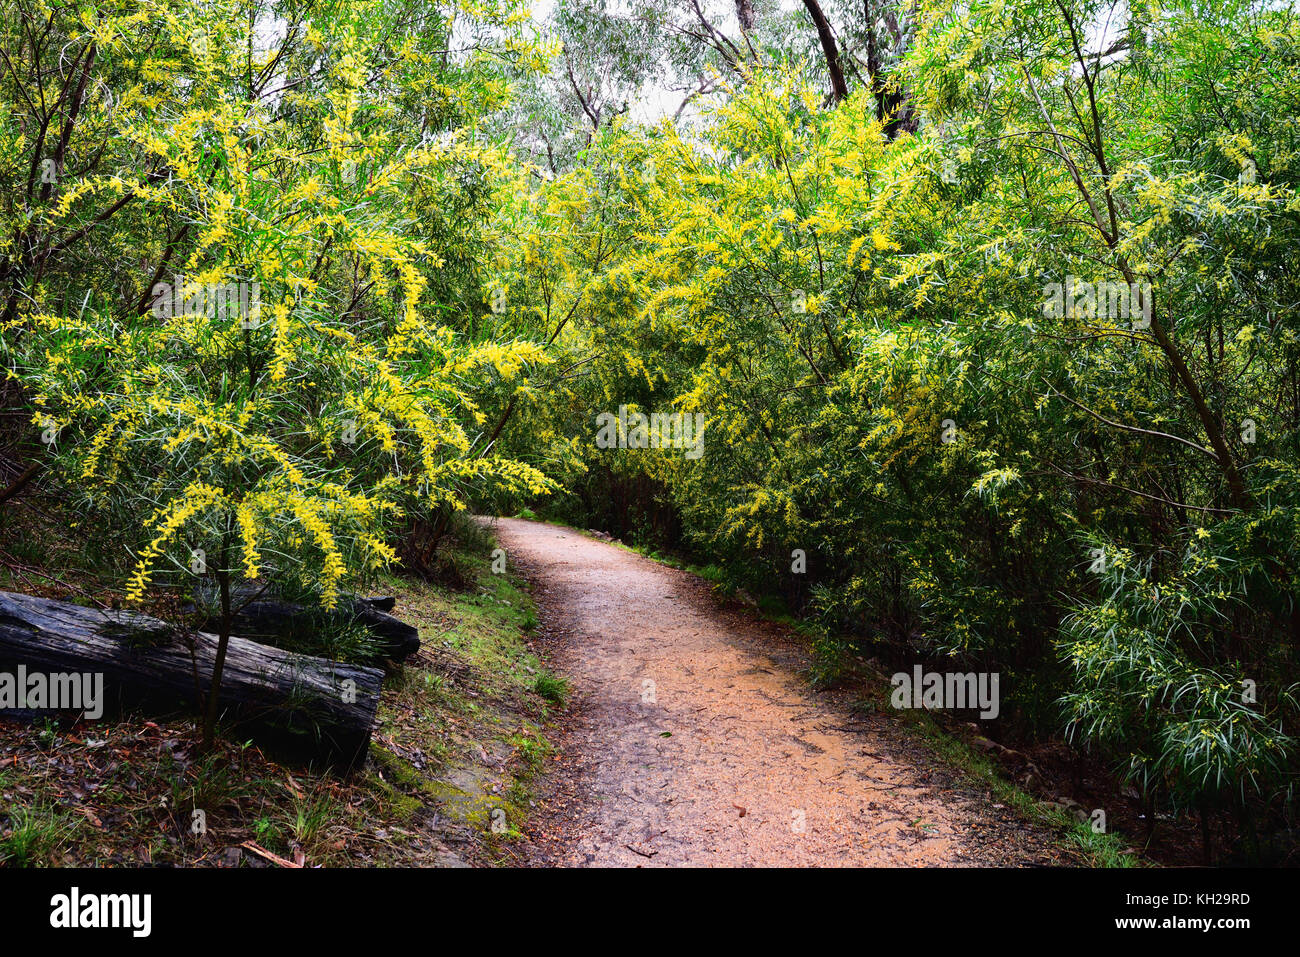 Australia VIctoria. A forest path that leads to the Silverband Falls in the Grampians National Park surrounded by golden wattle in early spring. Stock Photo